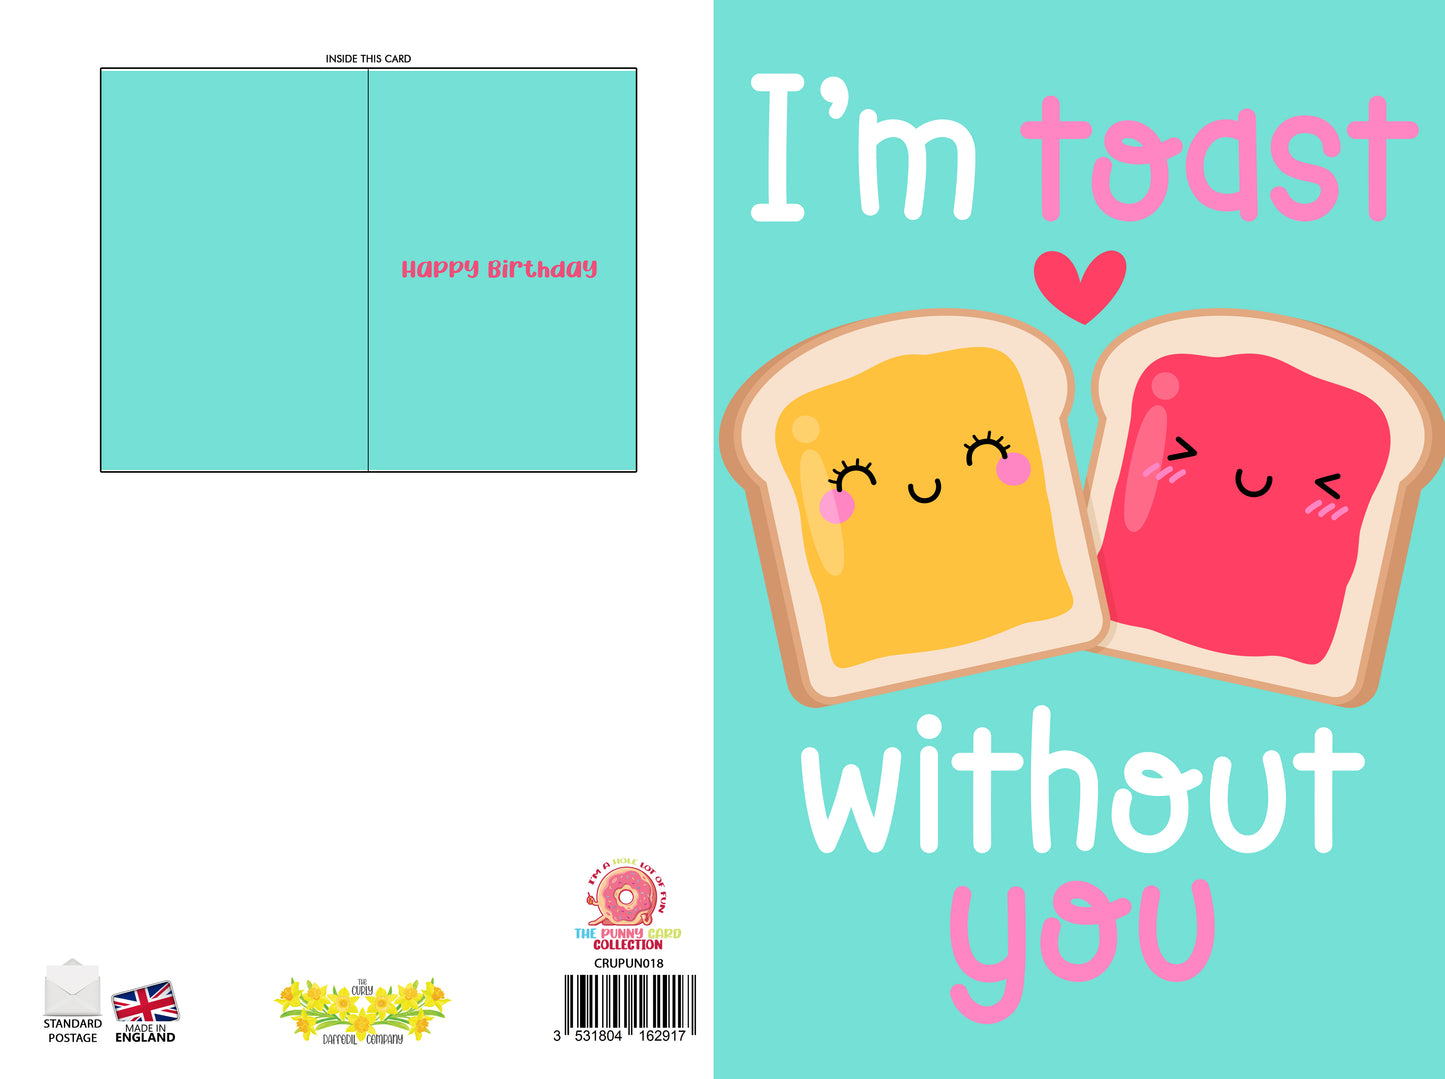 I'm Toast Without You